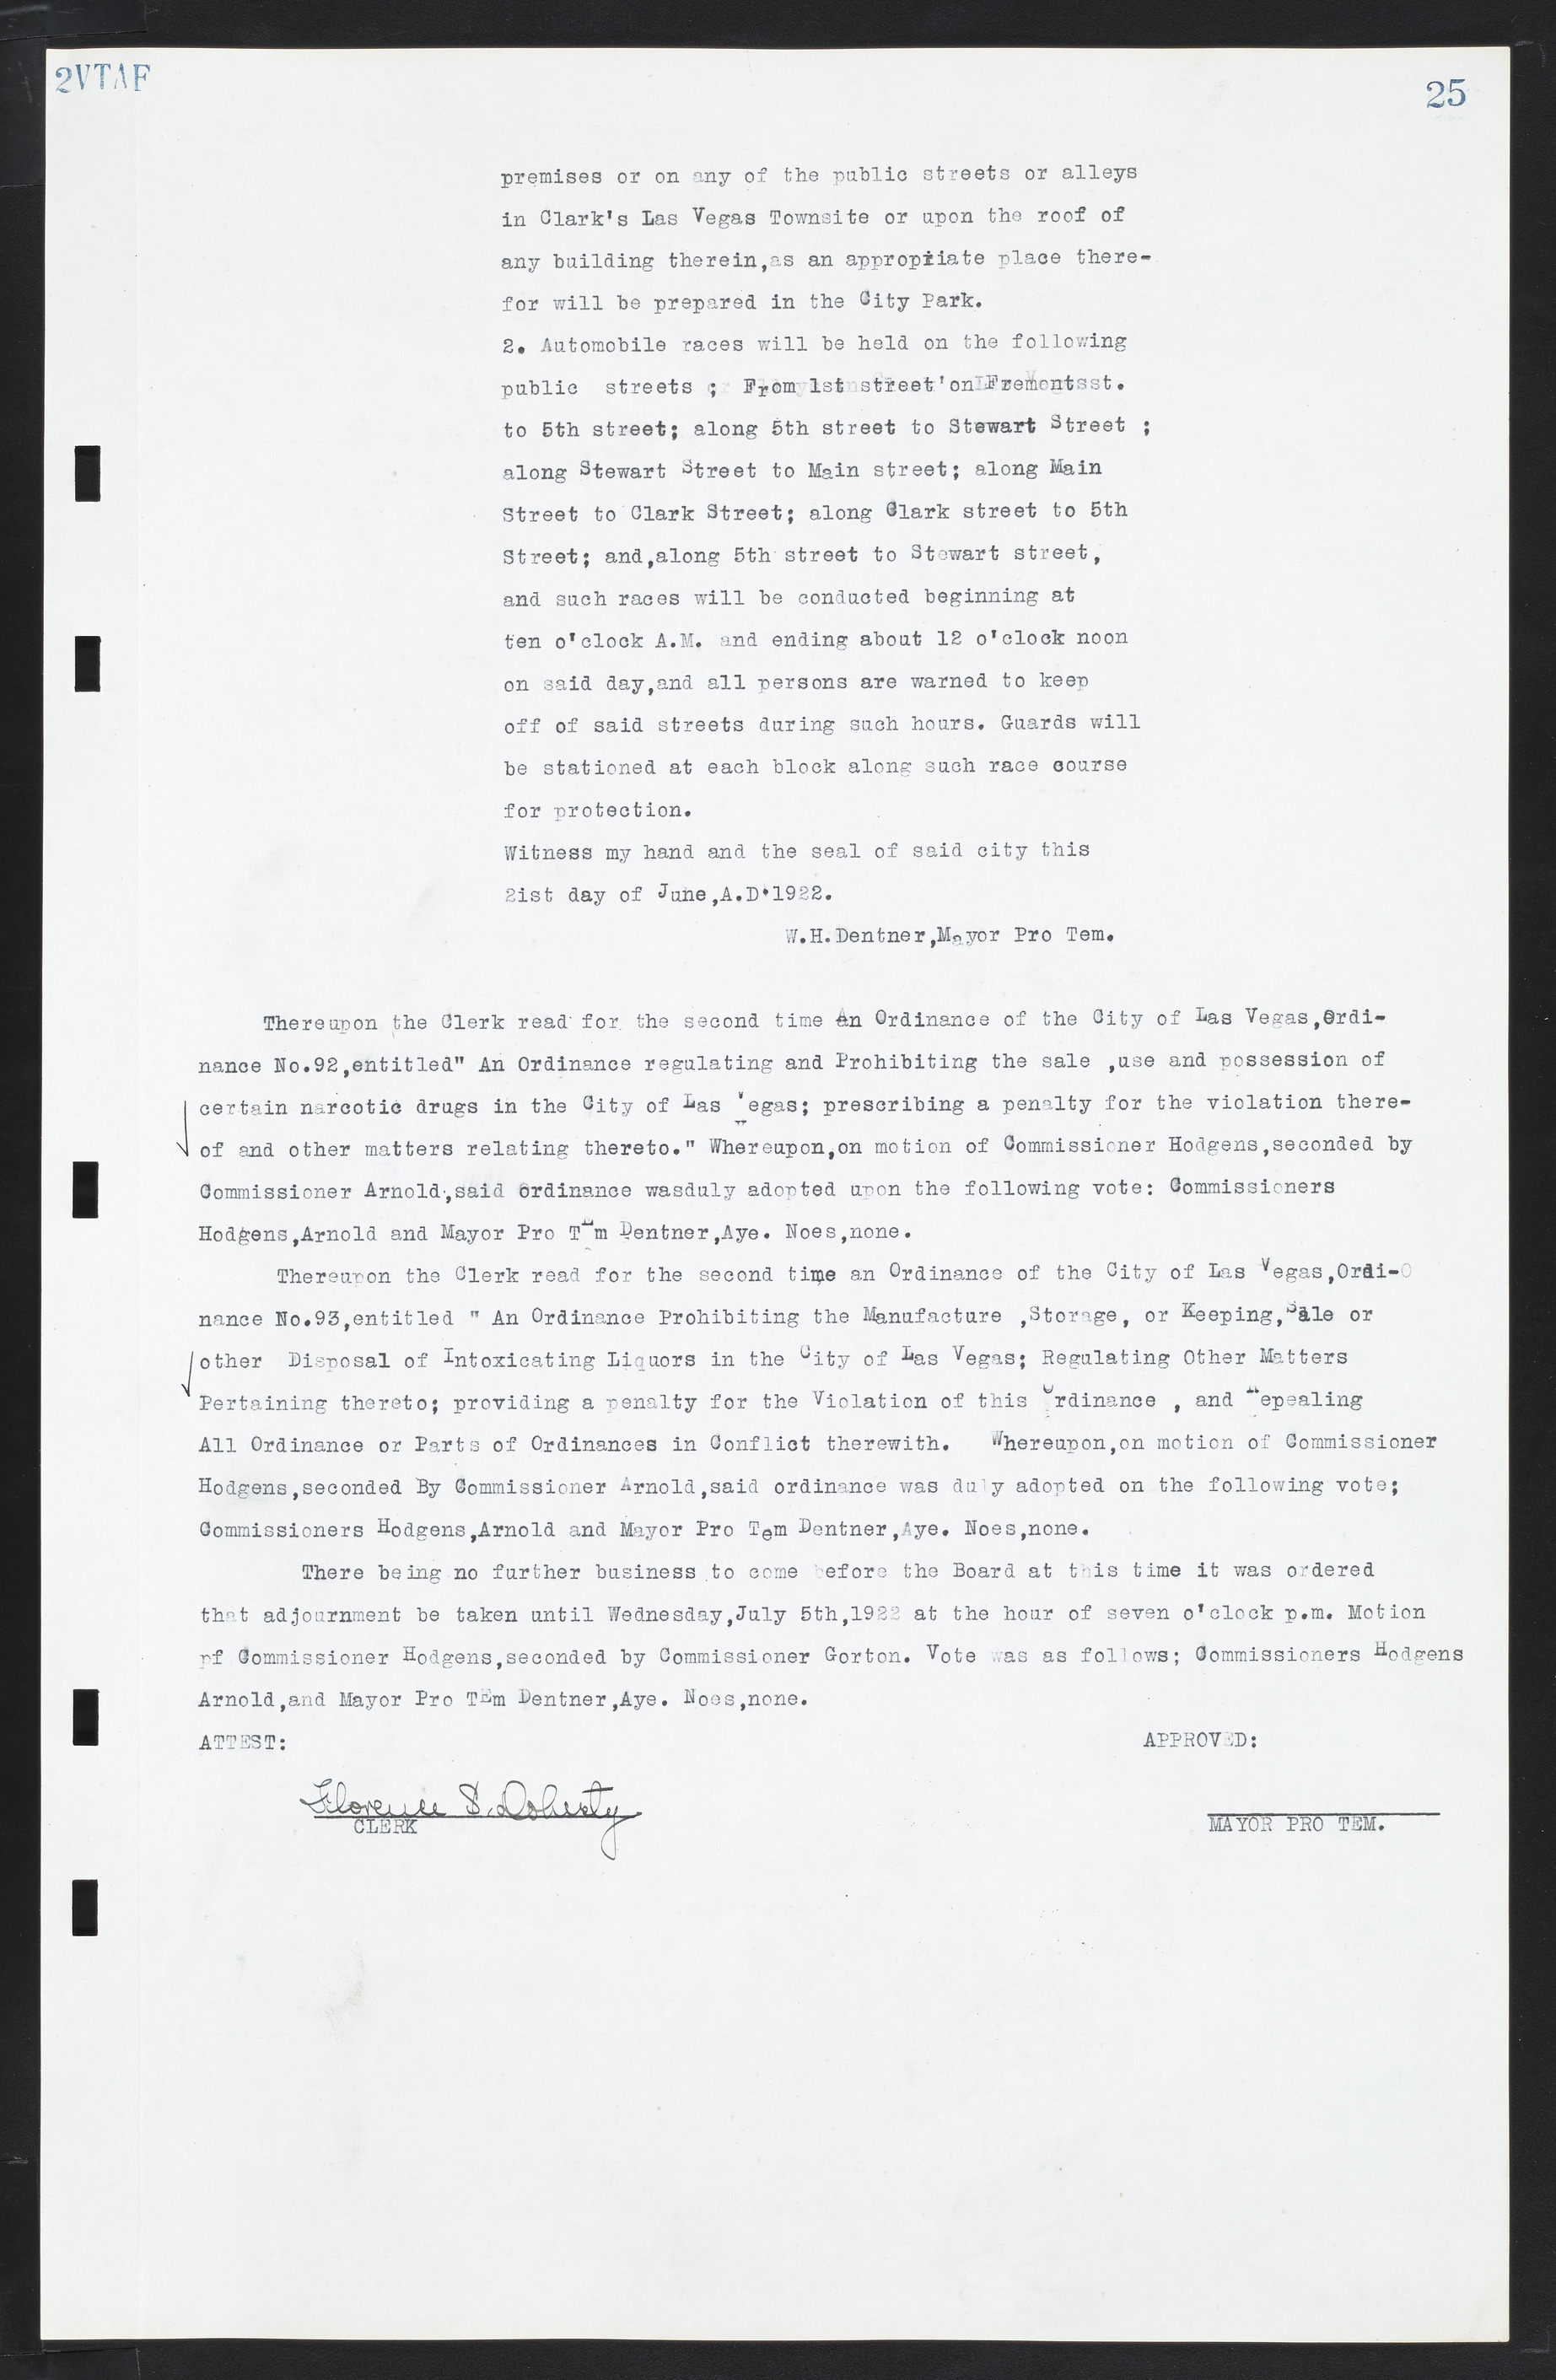 Las Vegas City Commission Minutes, March 1, 1922 to May 10, 1929, lvc000002-32